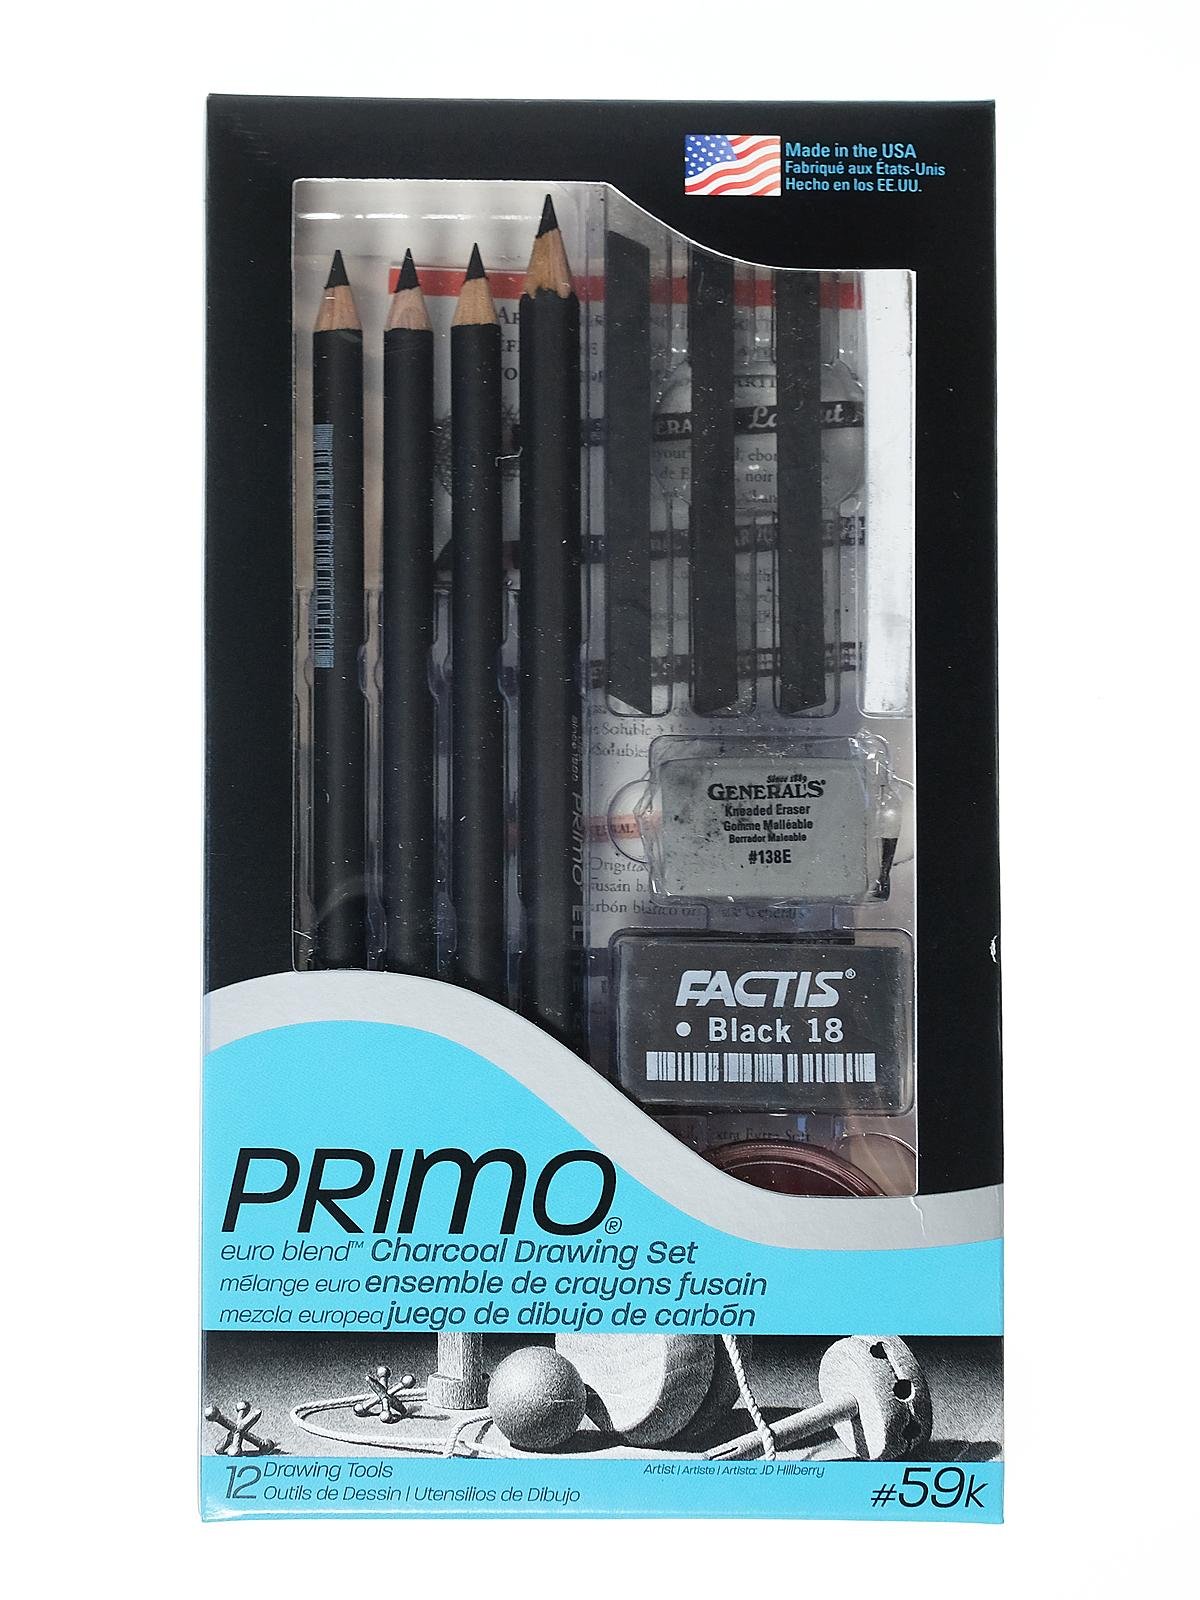 General's - Primo Euro Blend Charcoal Deluxe Set #59